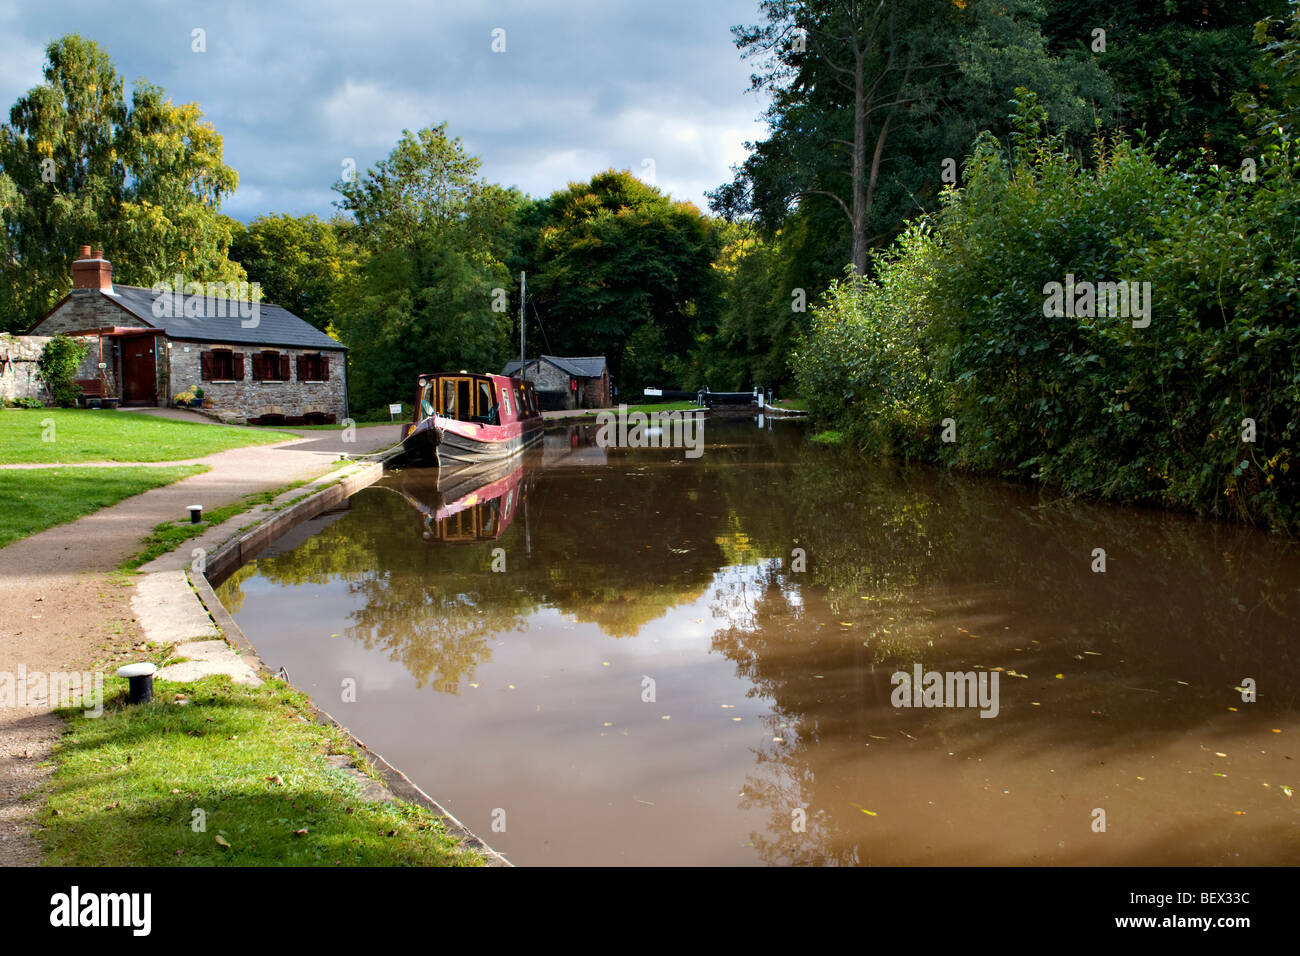 Picturesque reflection of boat house and moored canal boat on the Monmouth and Brecon Canal taken at Llangynidr mid Wales Stock Photo